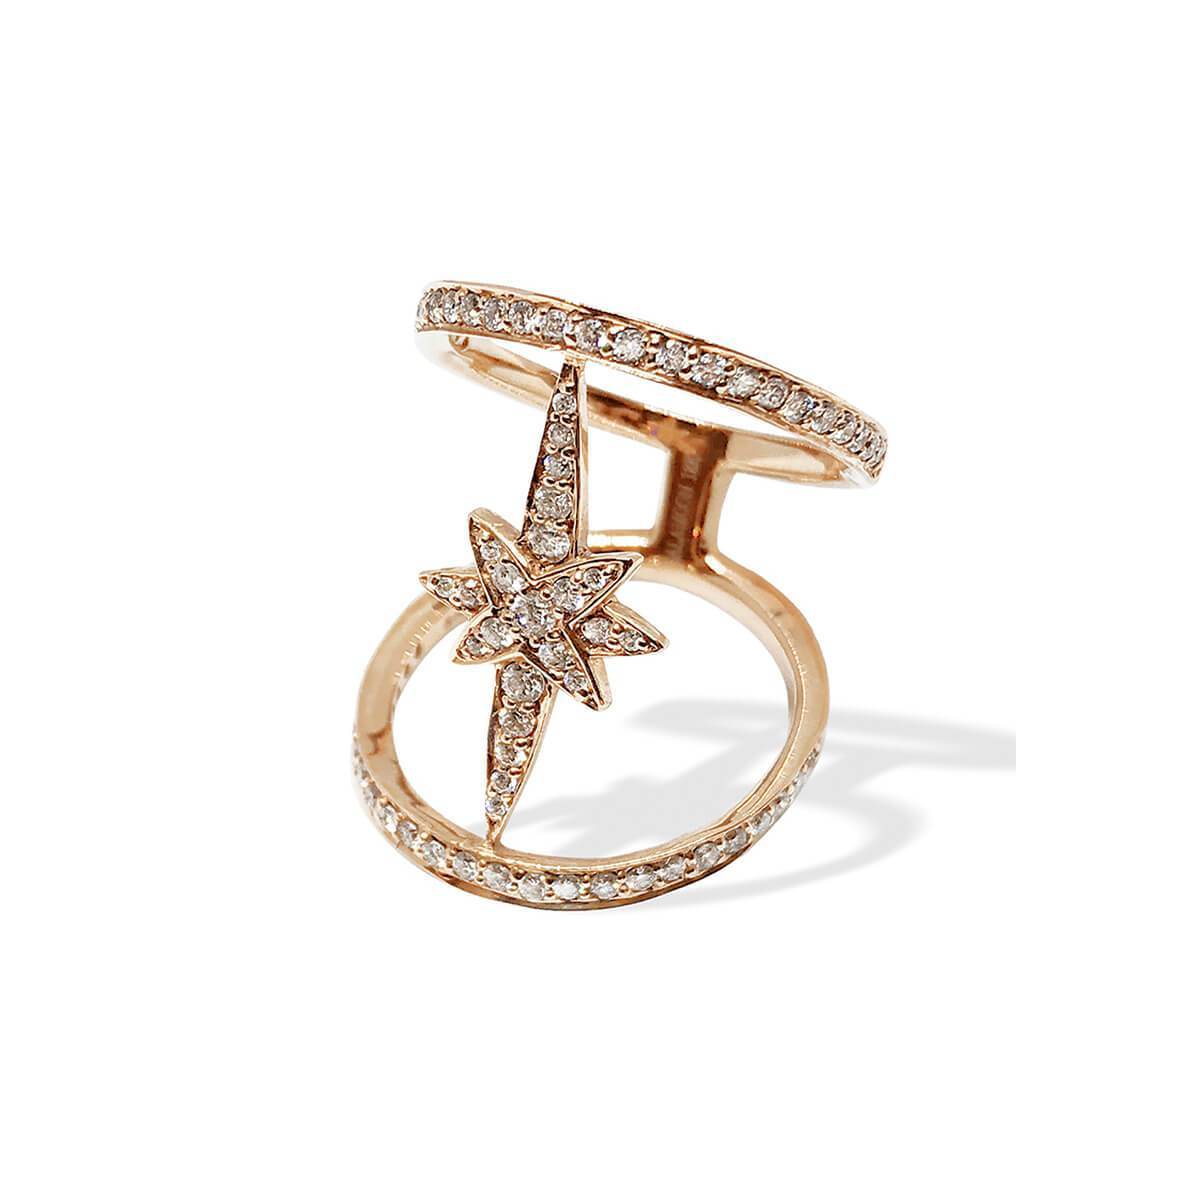 gold north star ring is finished with an array of glittering